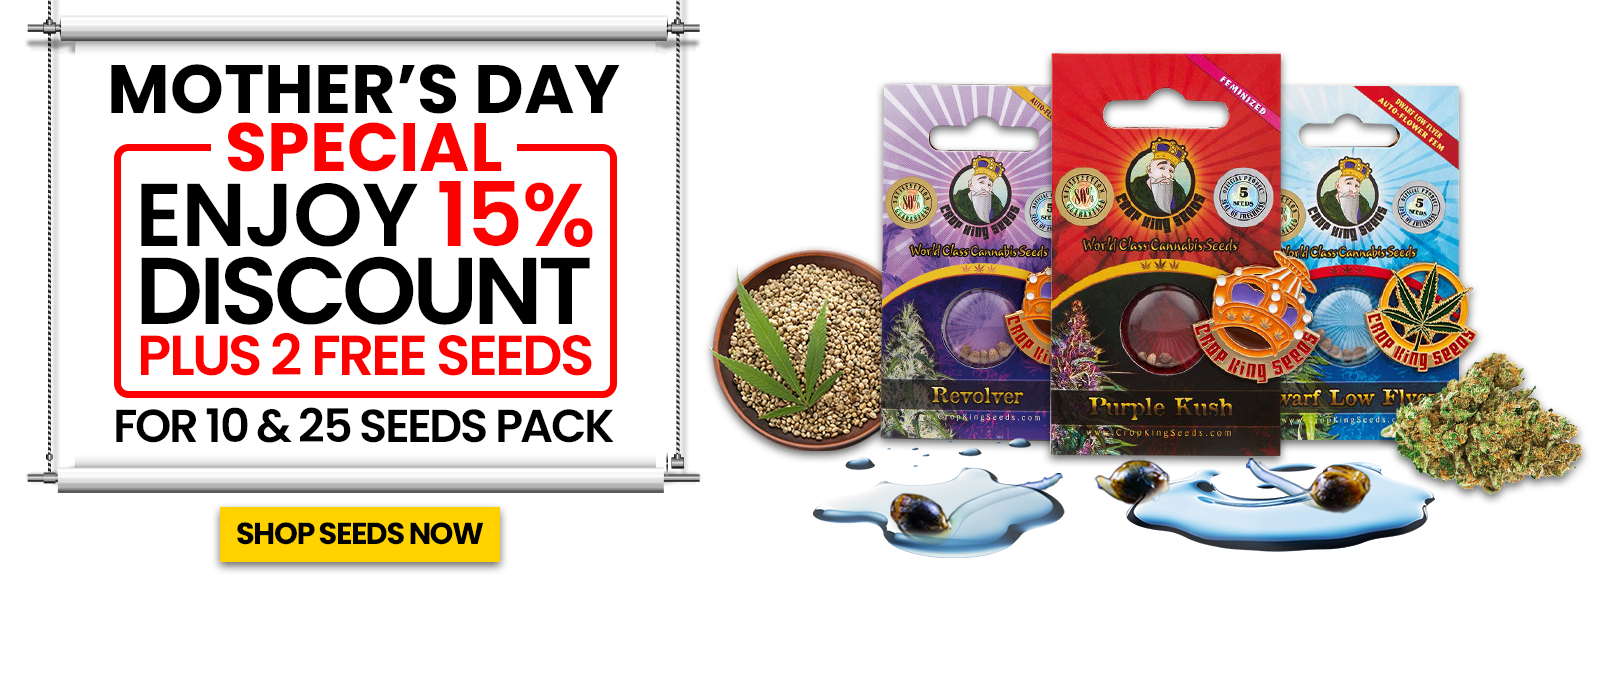 Crop King Seeds Mothers Day Promo